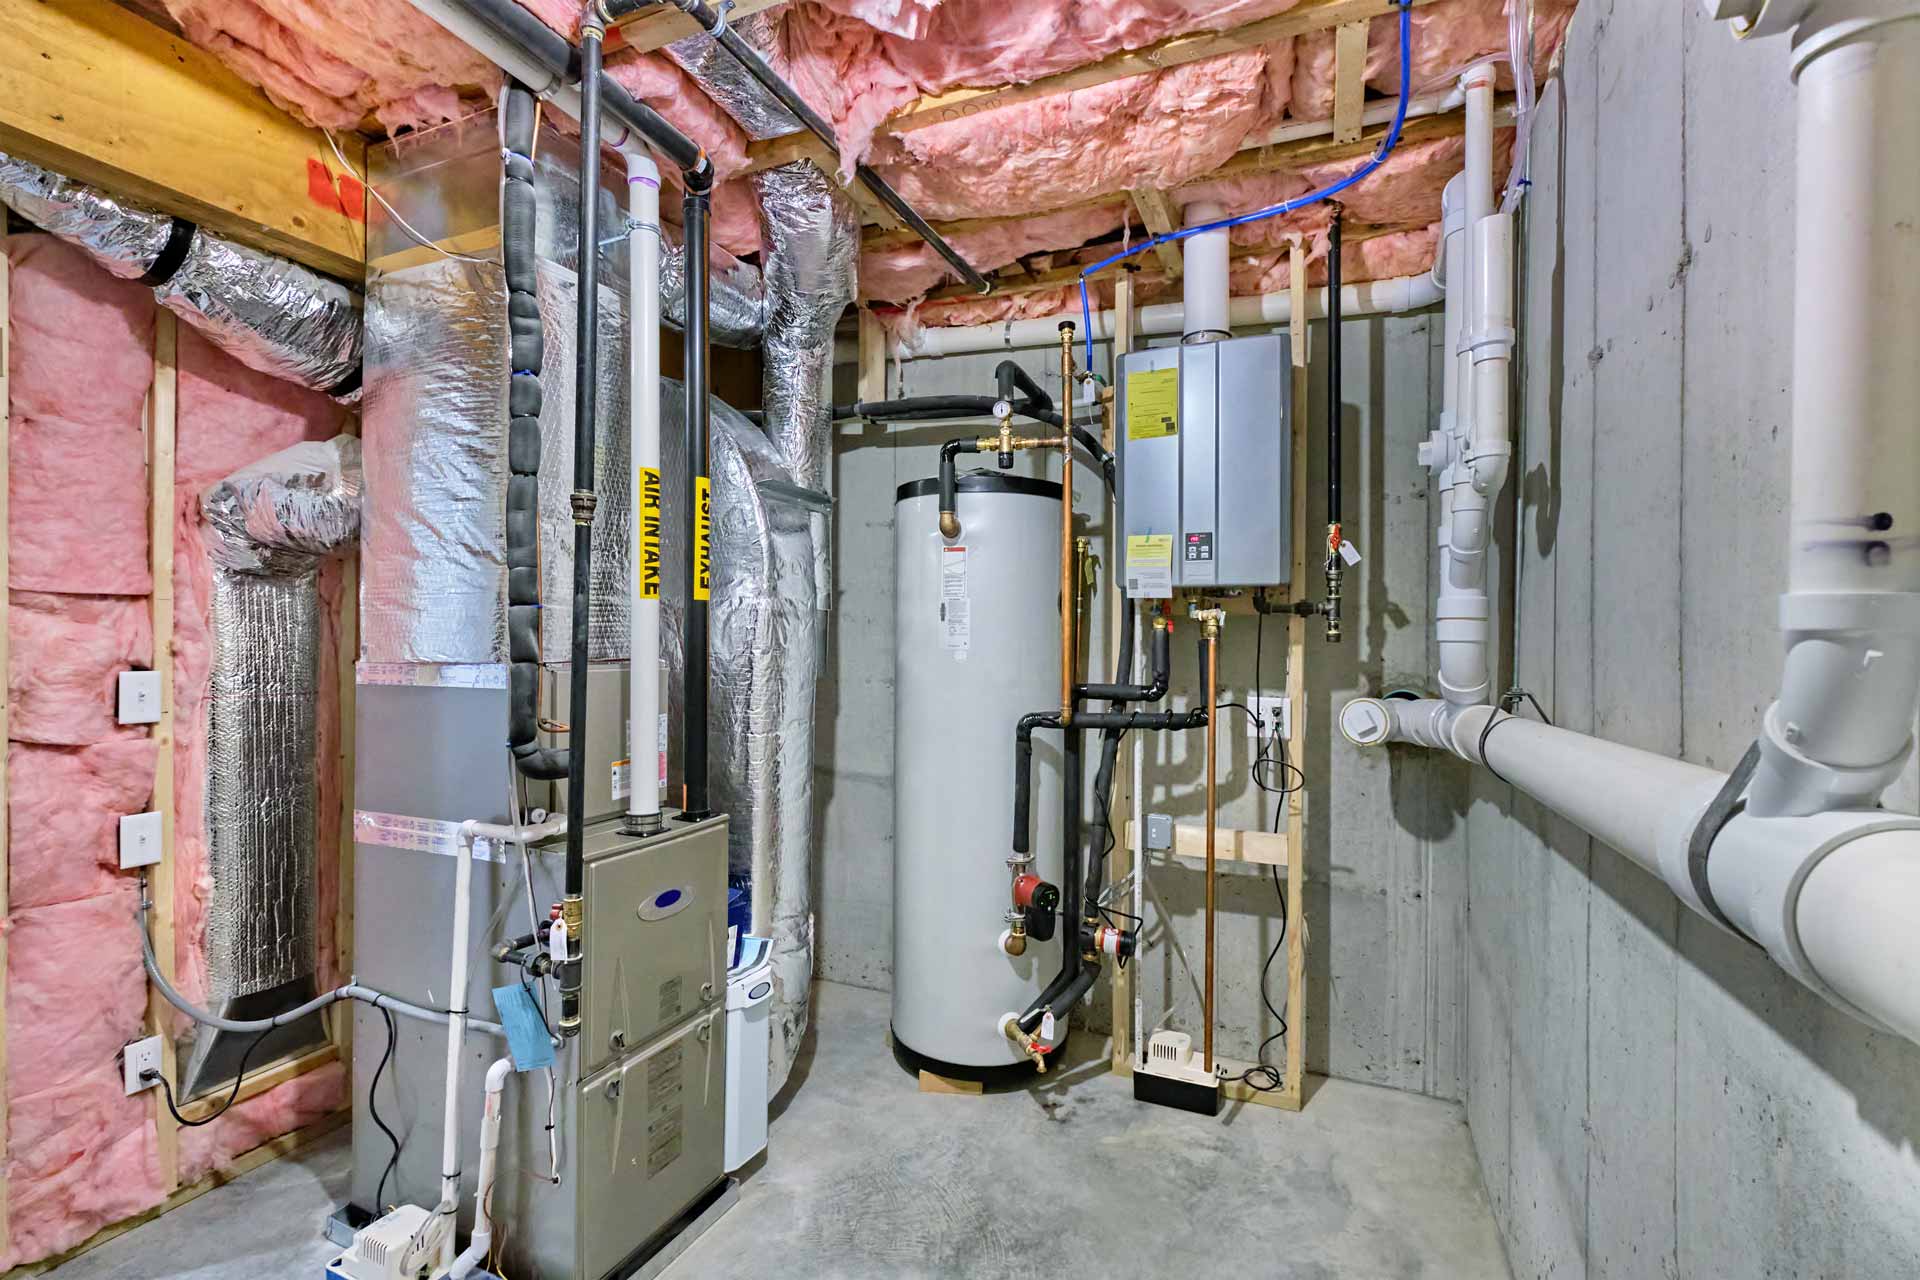 Water heater newly installed in unfinished basement